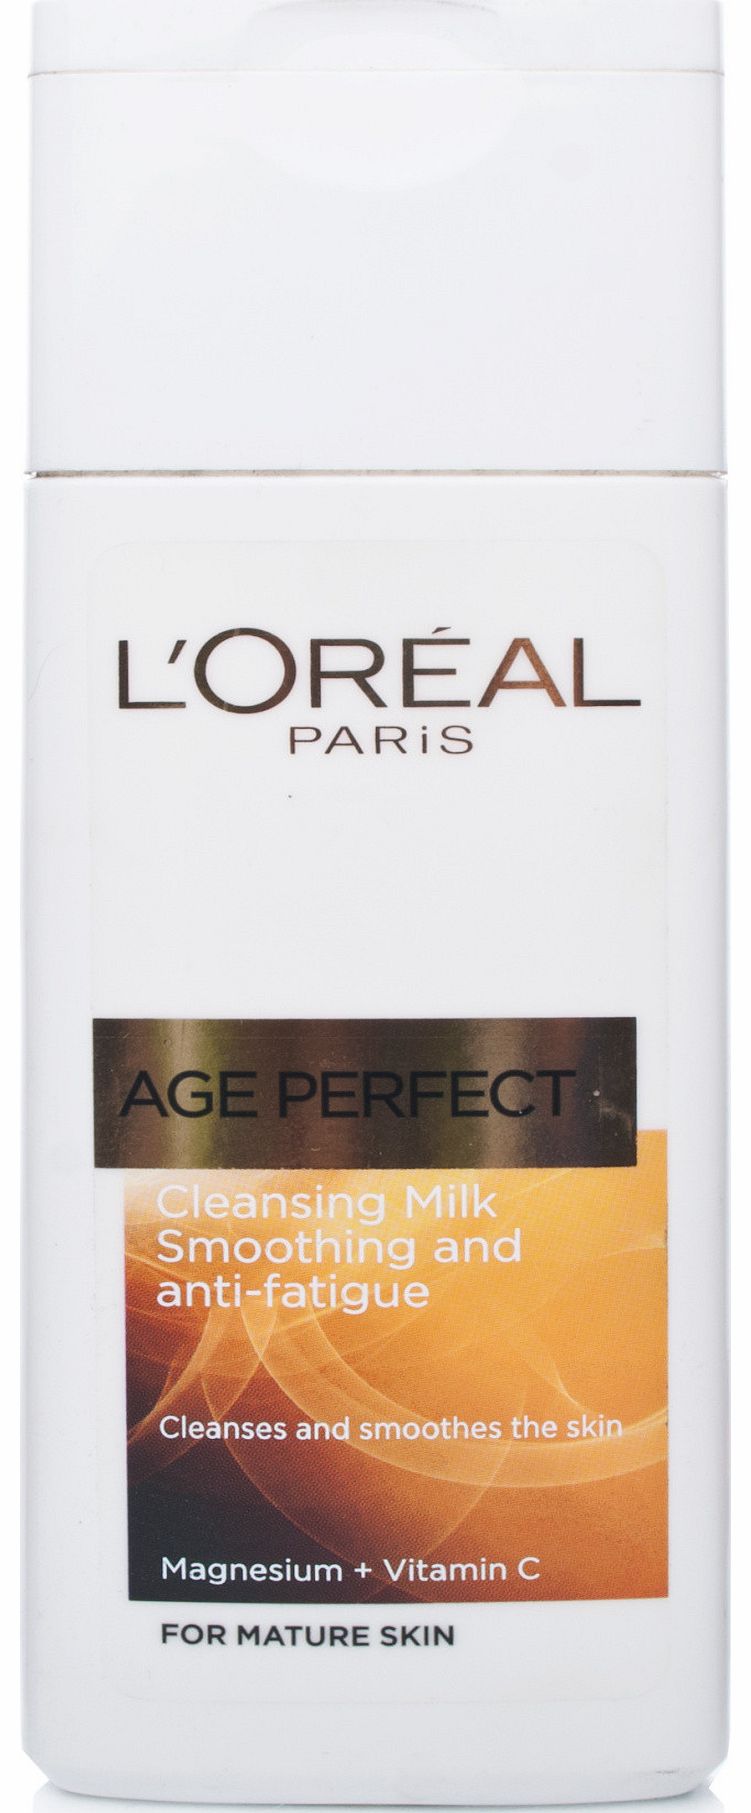 L'Oreal Age Perfect Smoothing Cleanser Milk